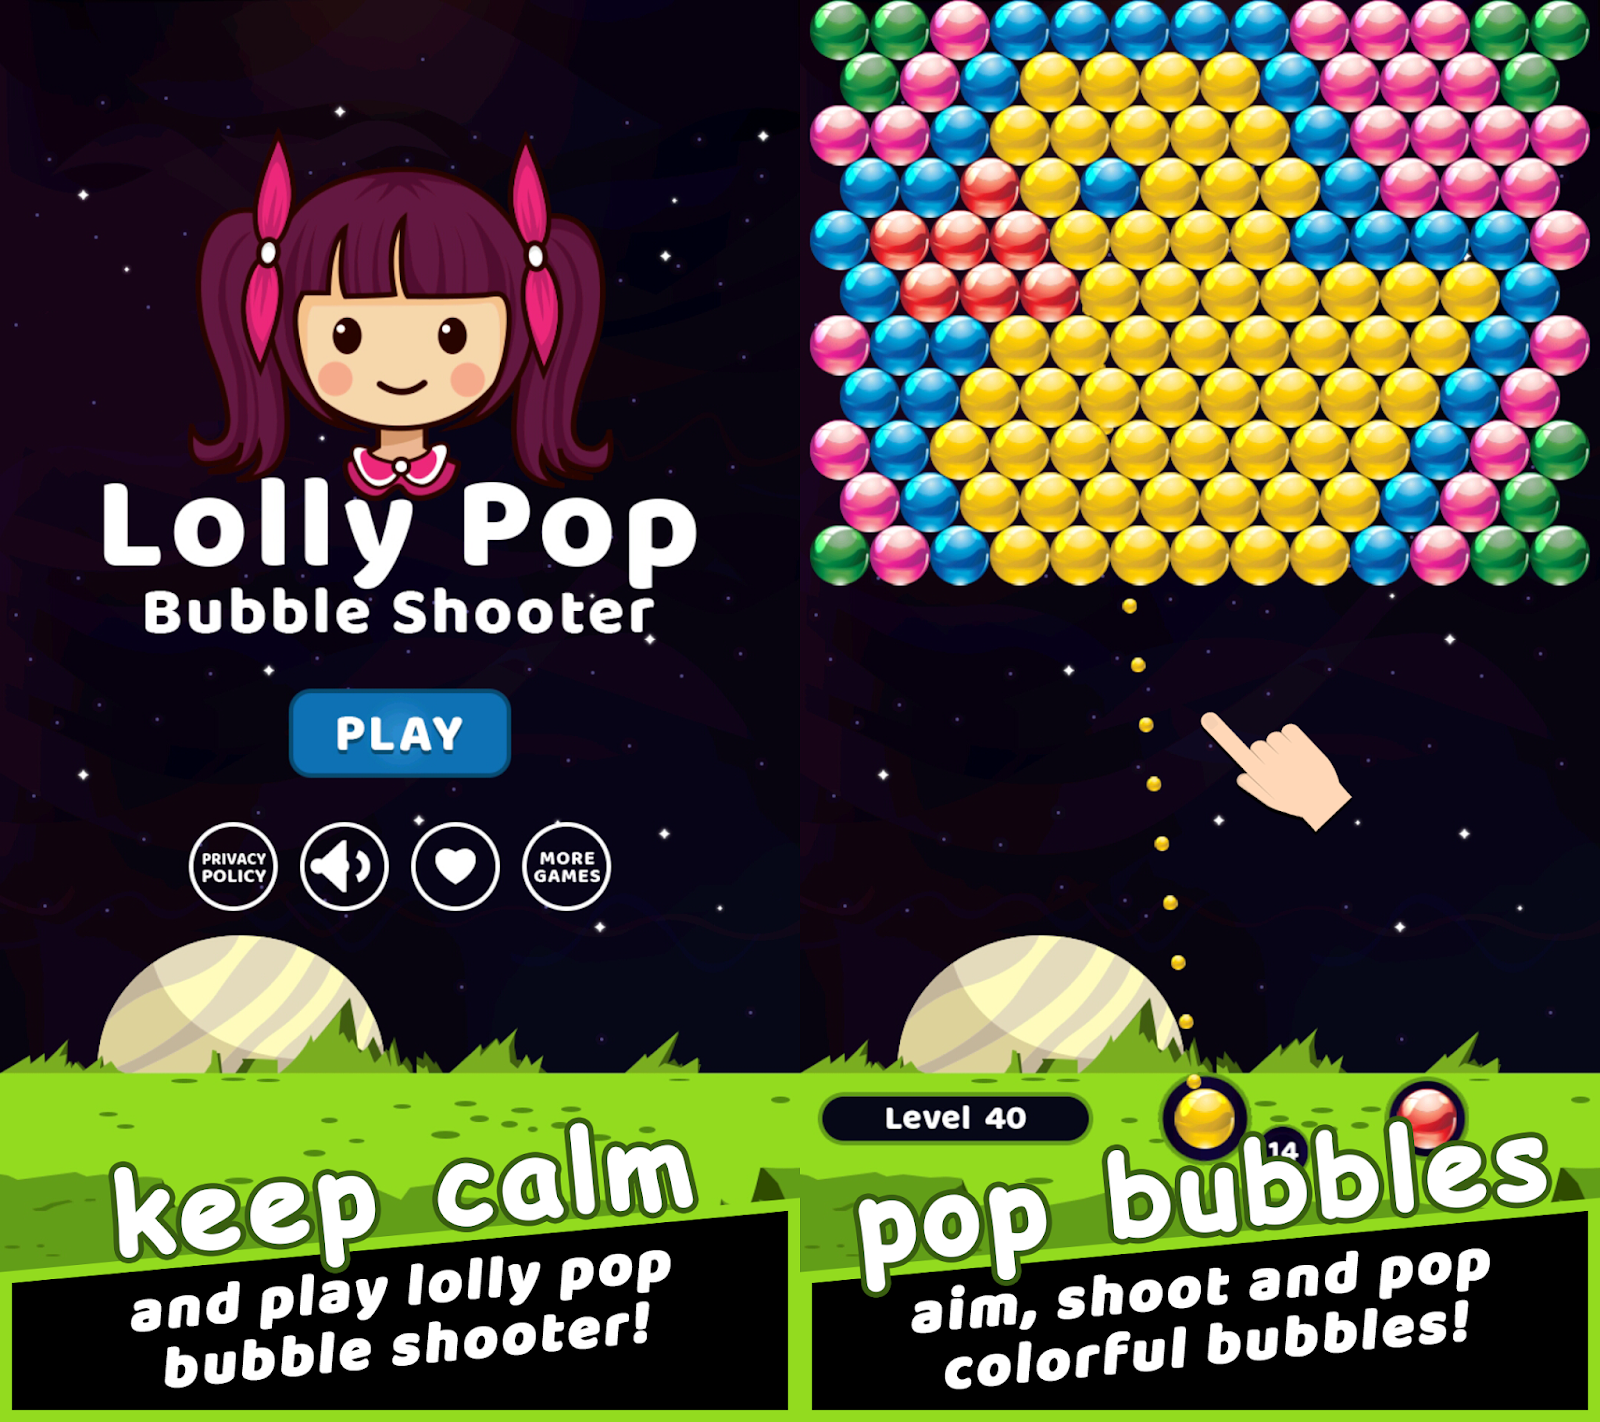 Discover the galaxy: Lolly Pop Bubble Shooter version 2.0 with more.